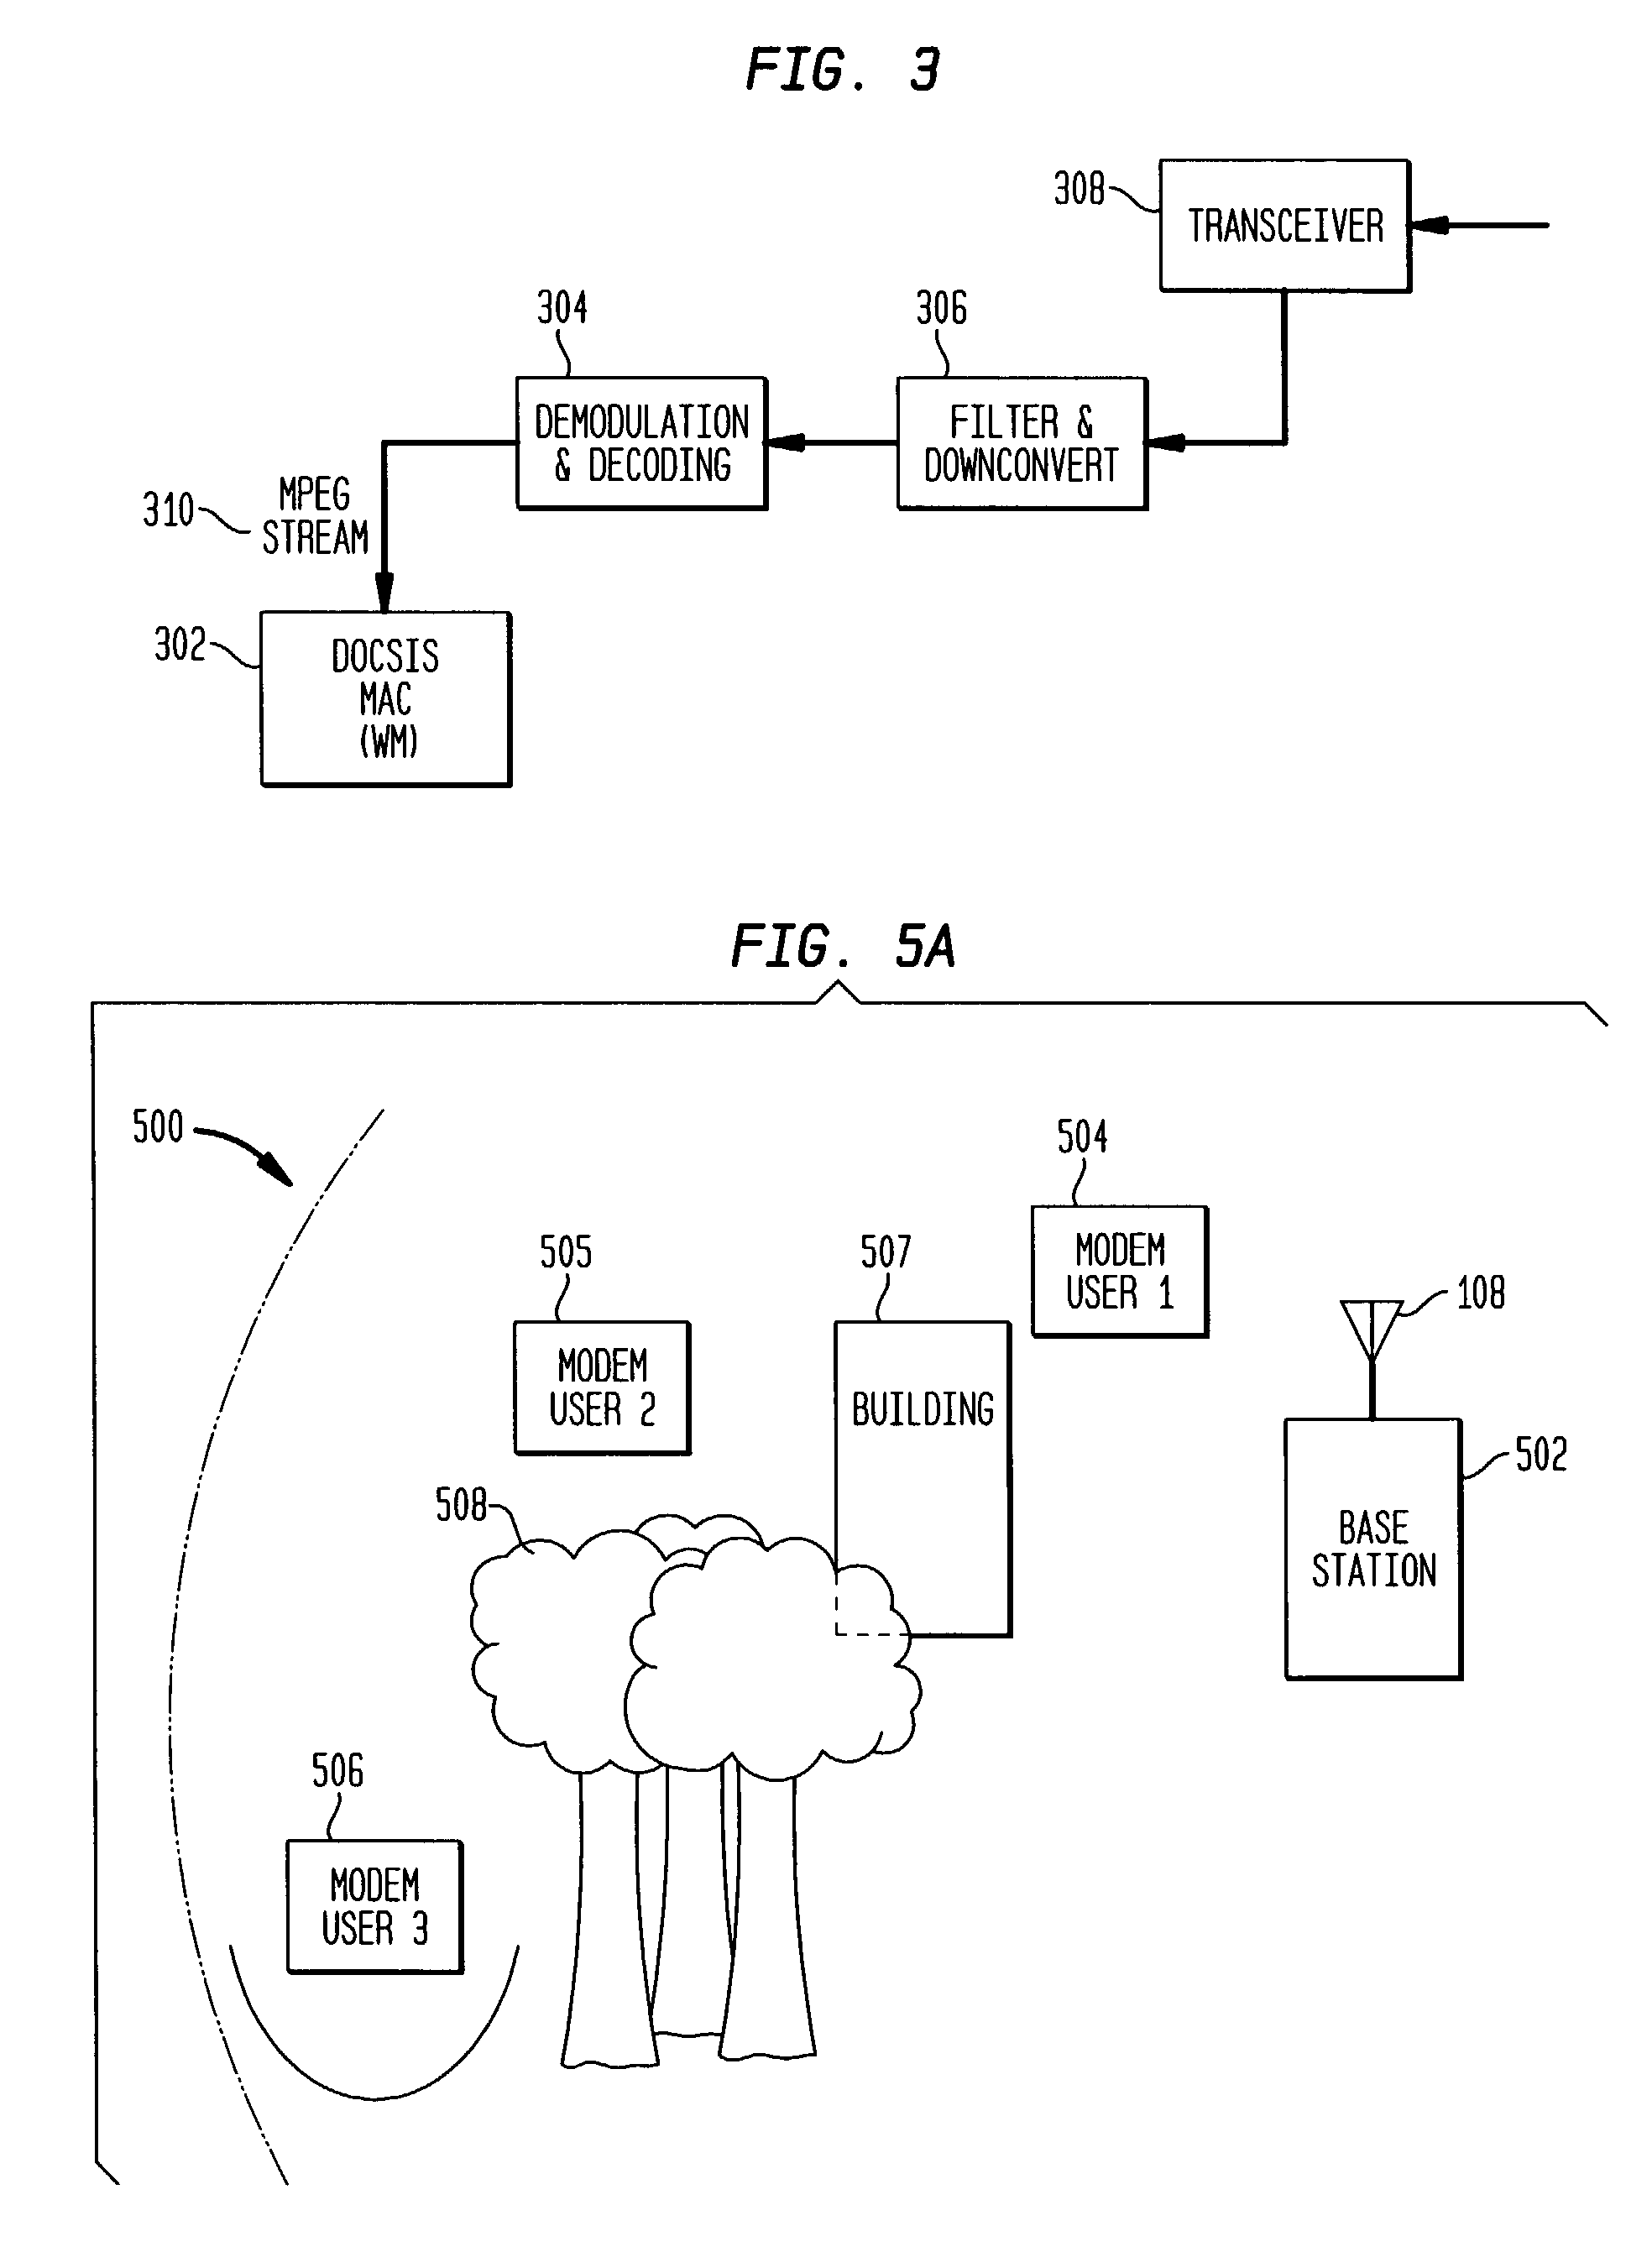 Downstream adaptive modulation in DOCSIS based communications systems